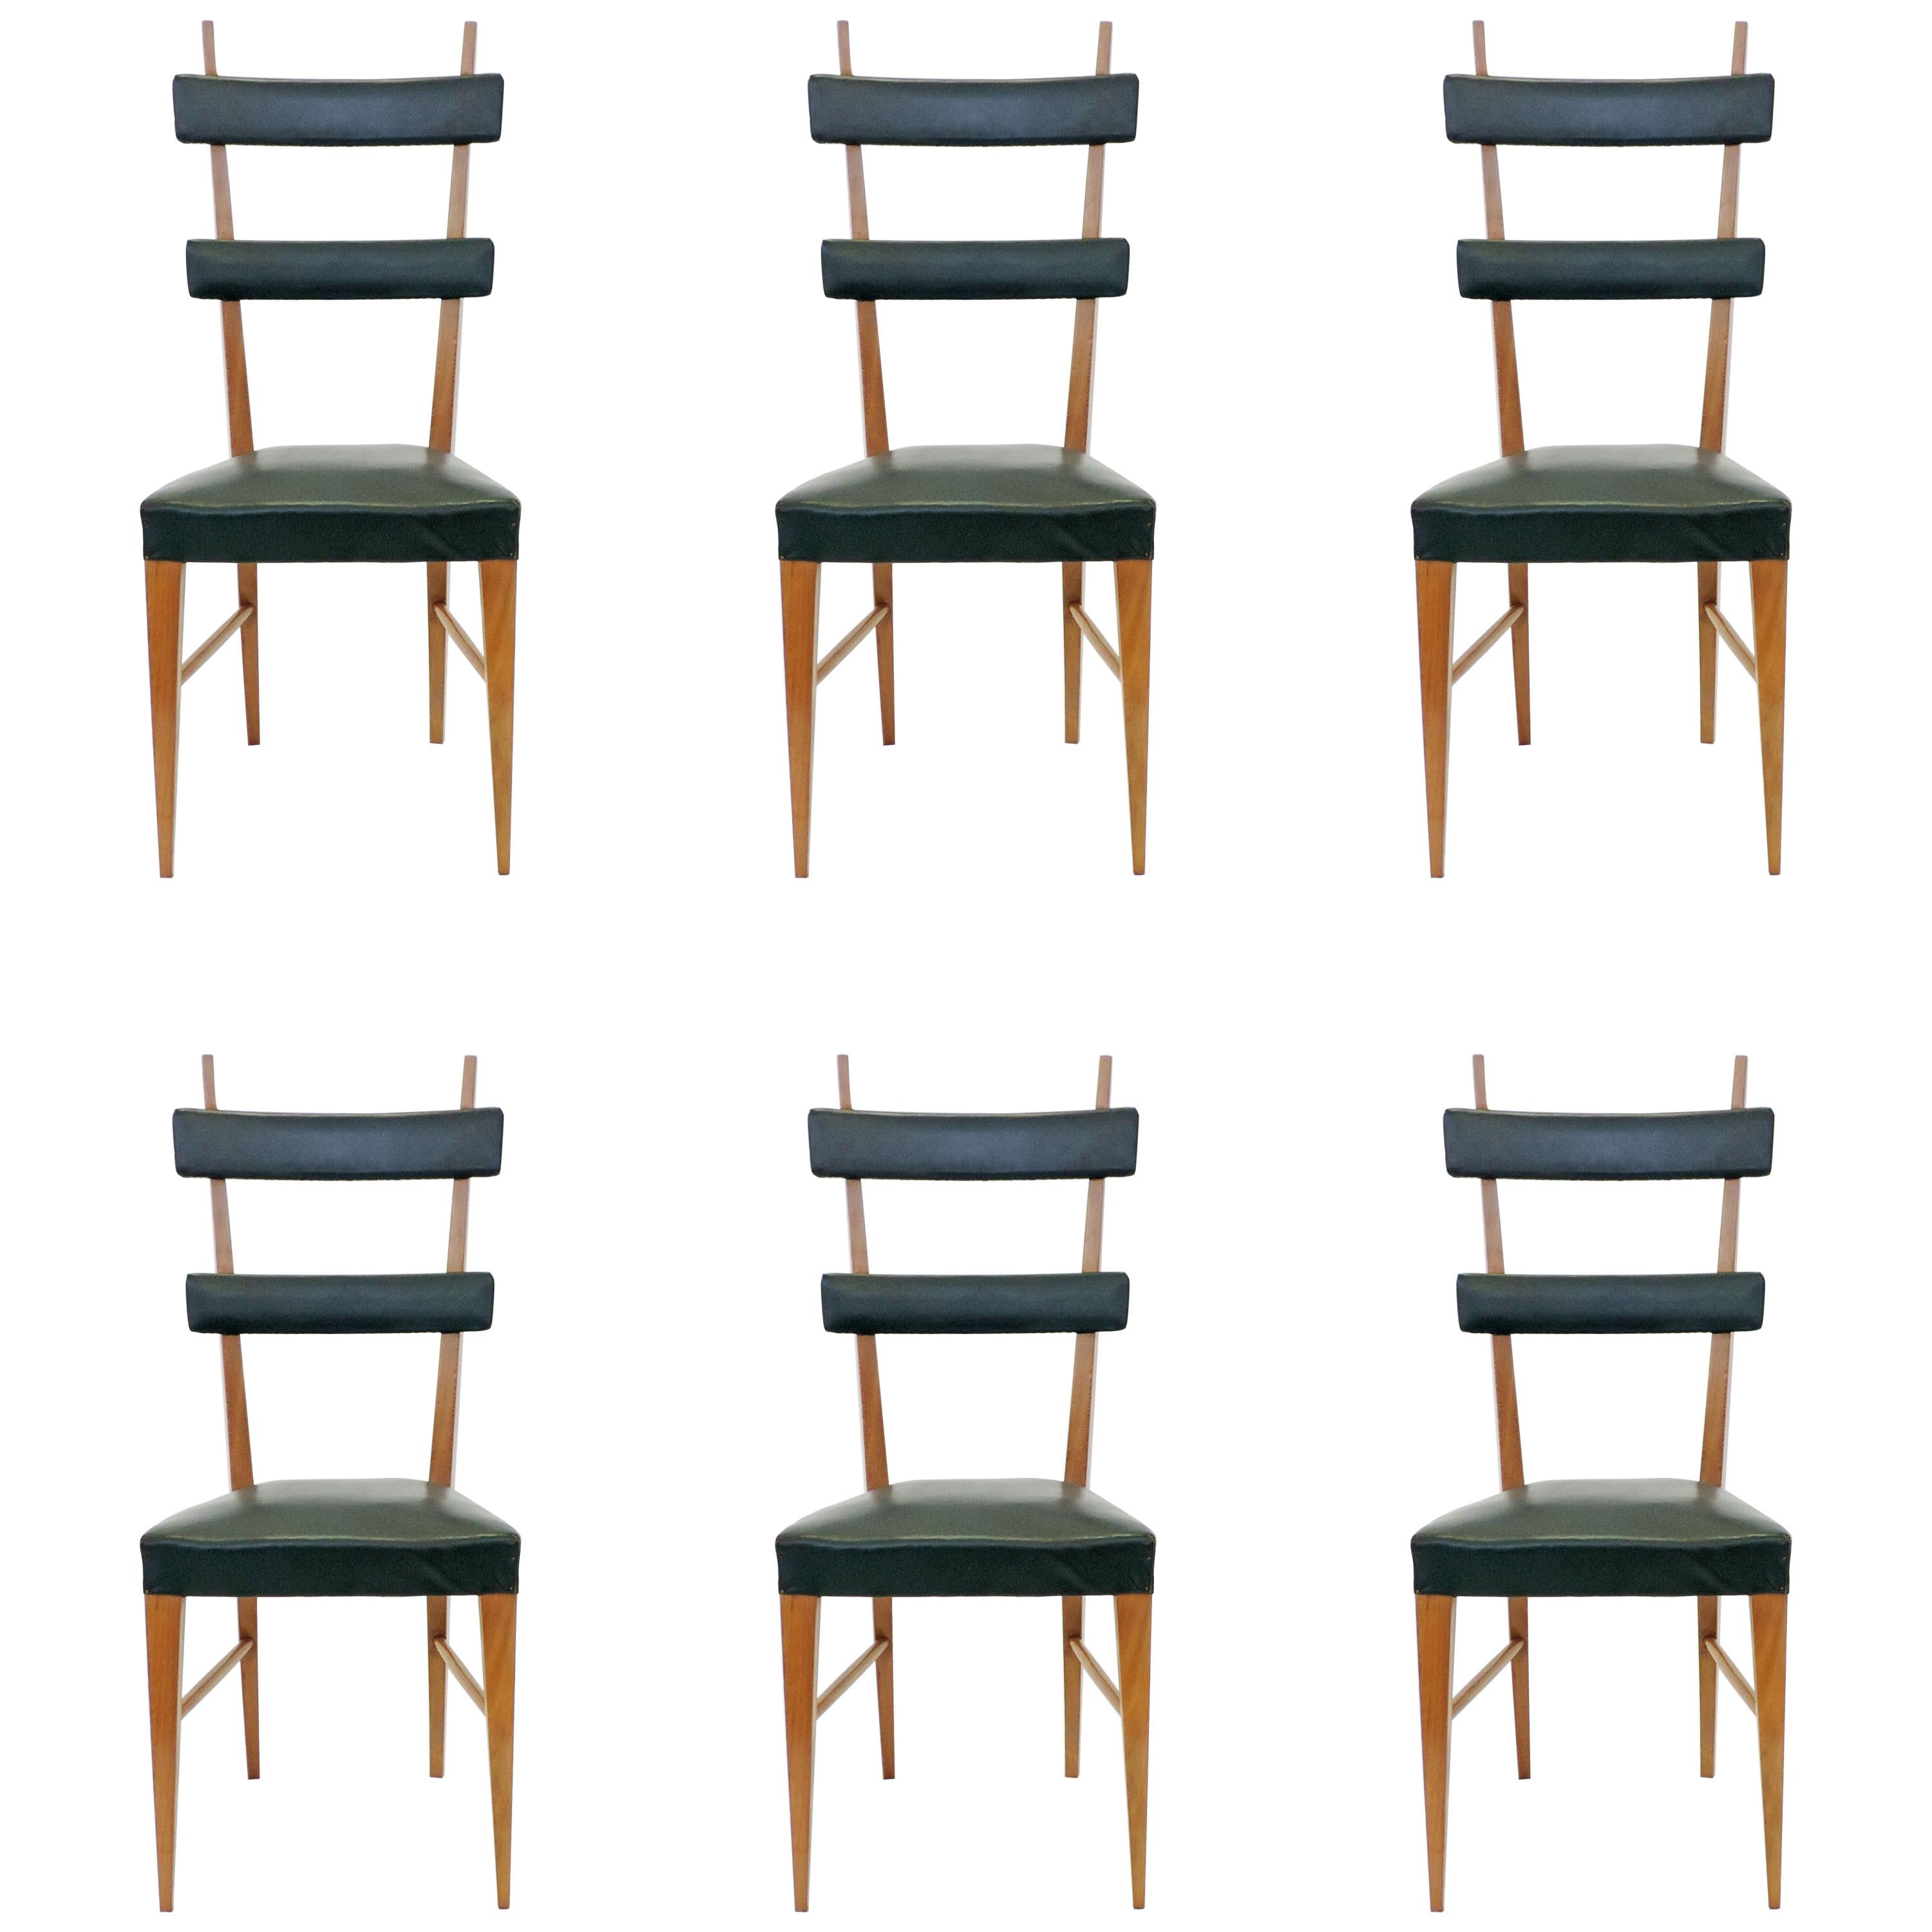 Set of 6 Italian 1950s High Back Dining Chairs